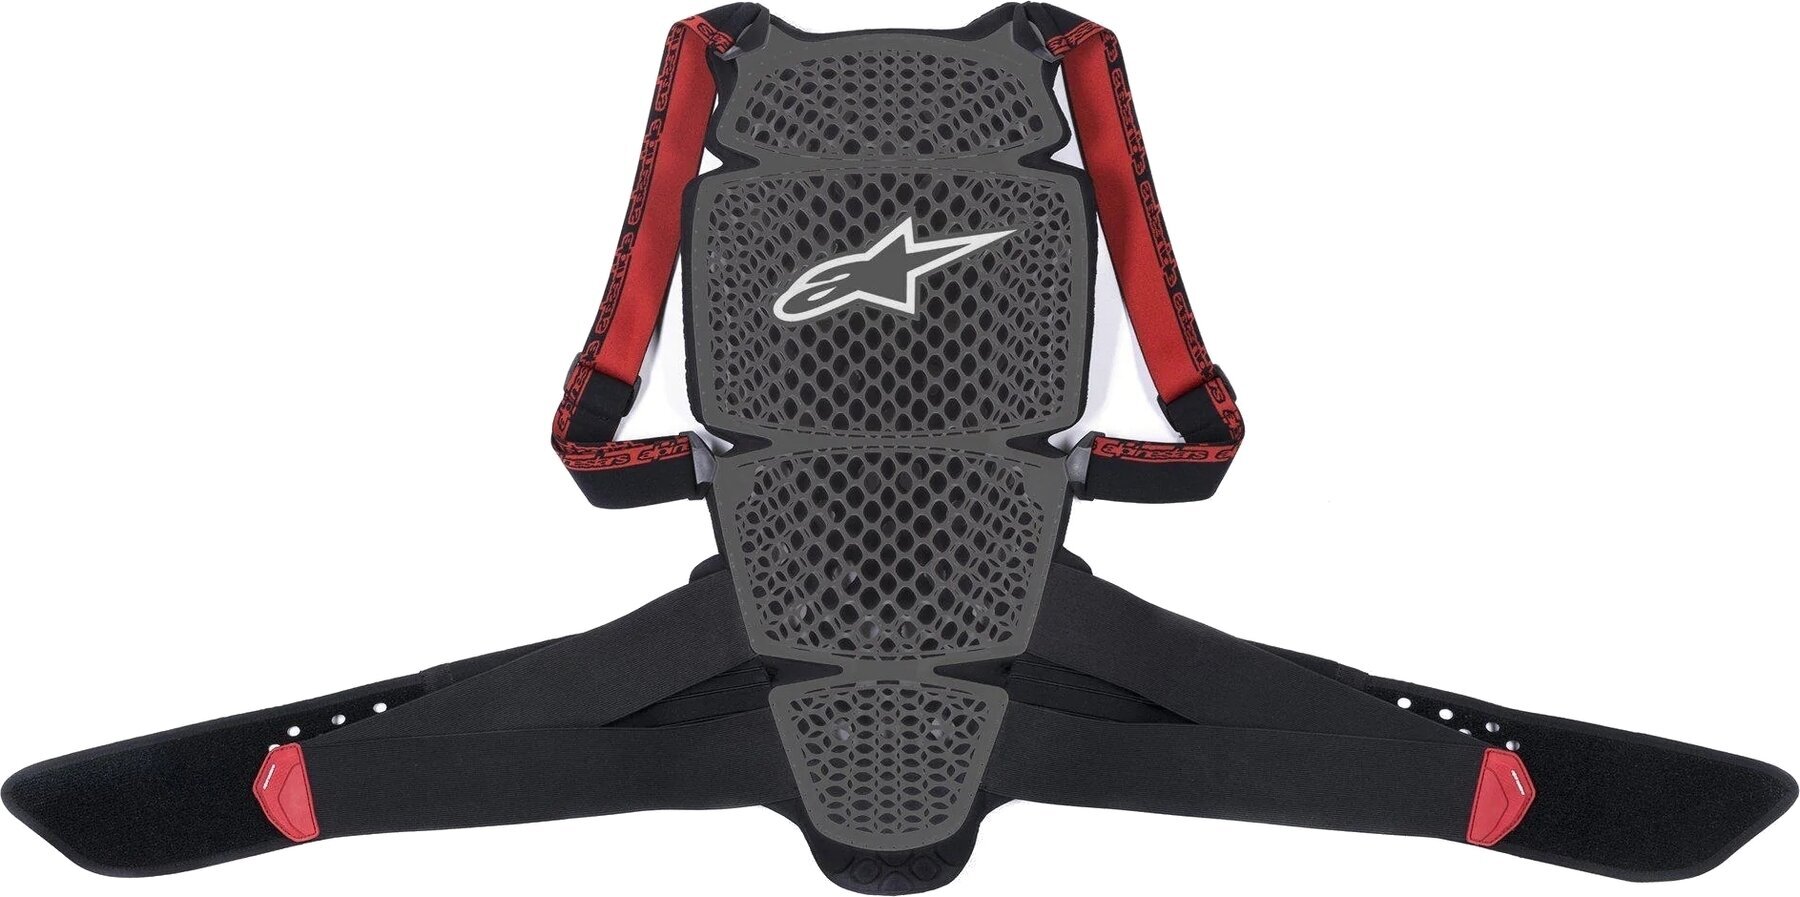 Back Protector Alpinestars Back Protector Nucleon KR-Cell Smoke Black/Red S